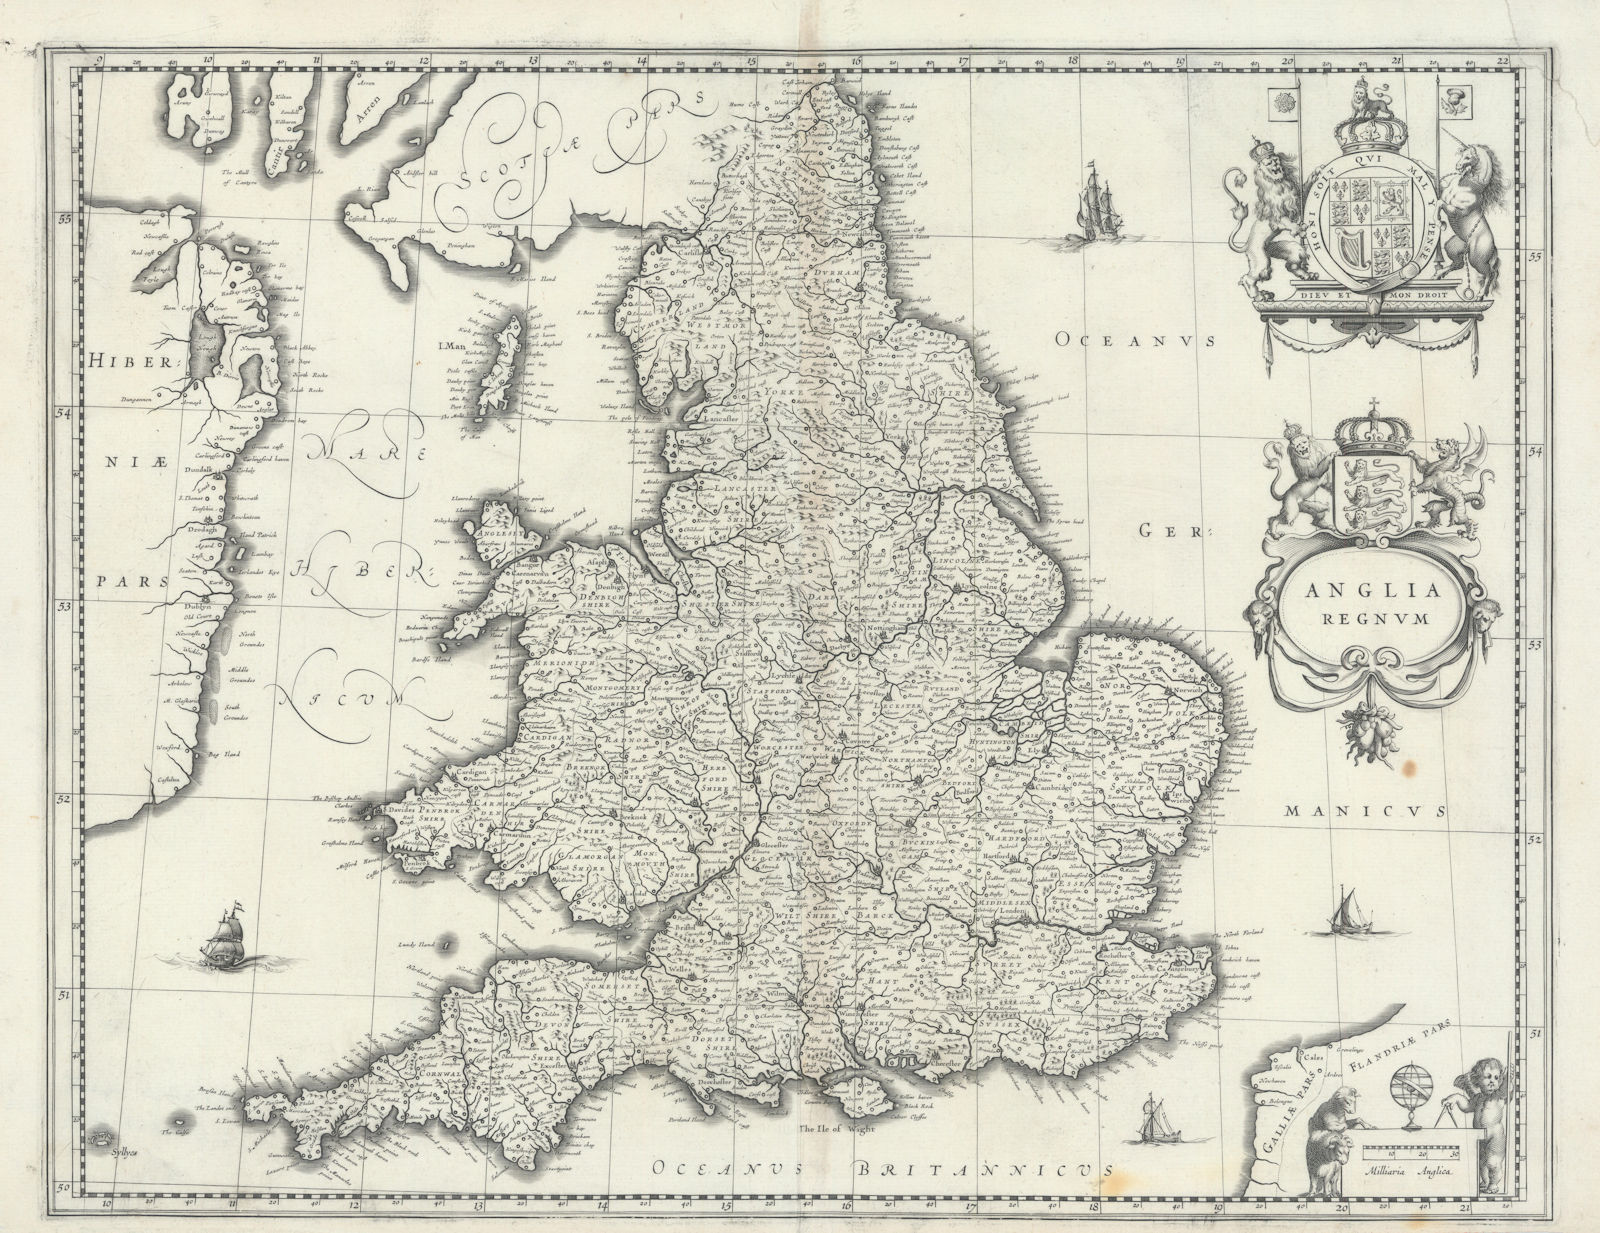 Associate Product Anglia Regnum by Willem Blaeu. England & Wales 1645 old antique map plan chart